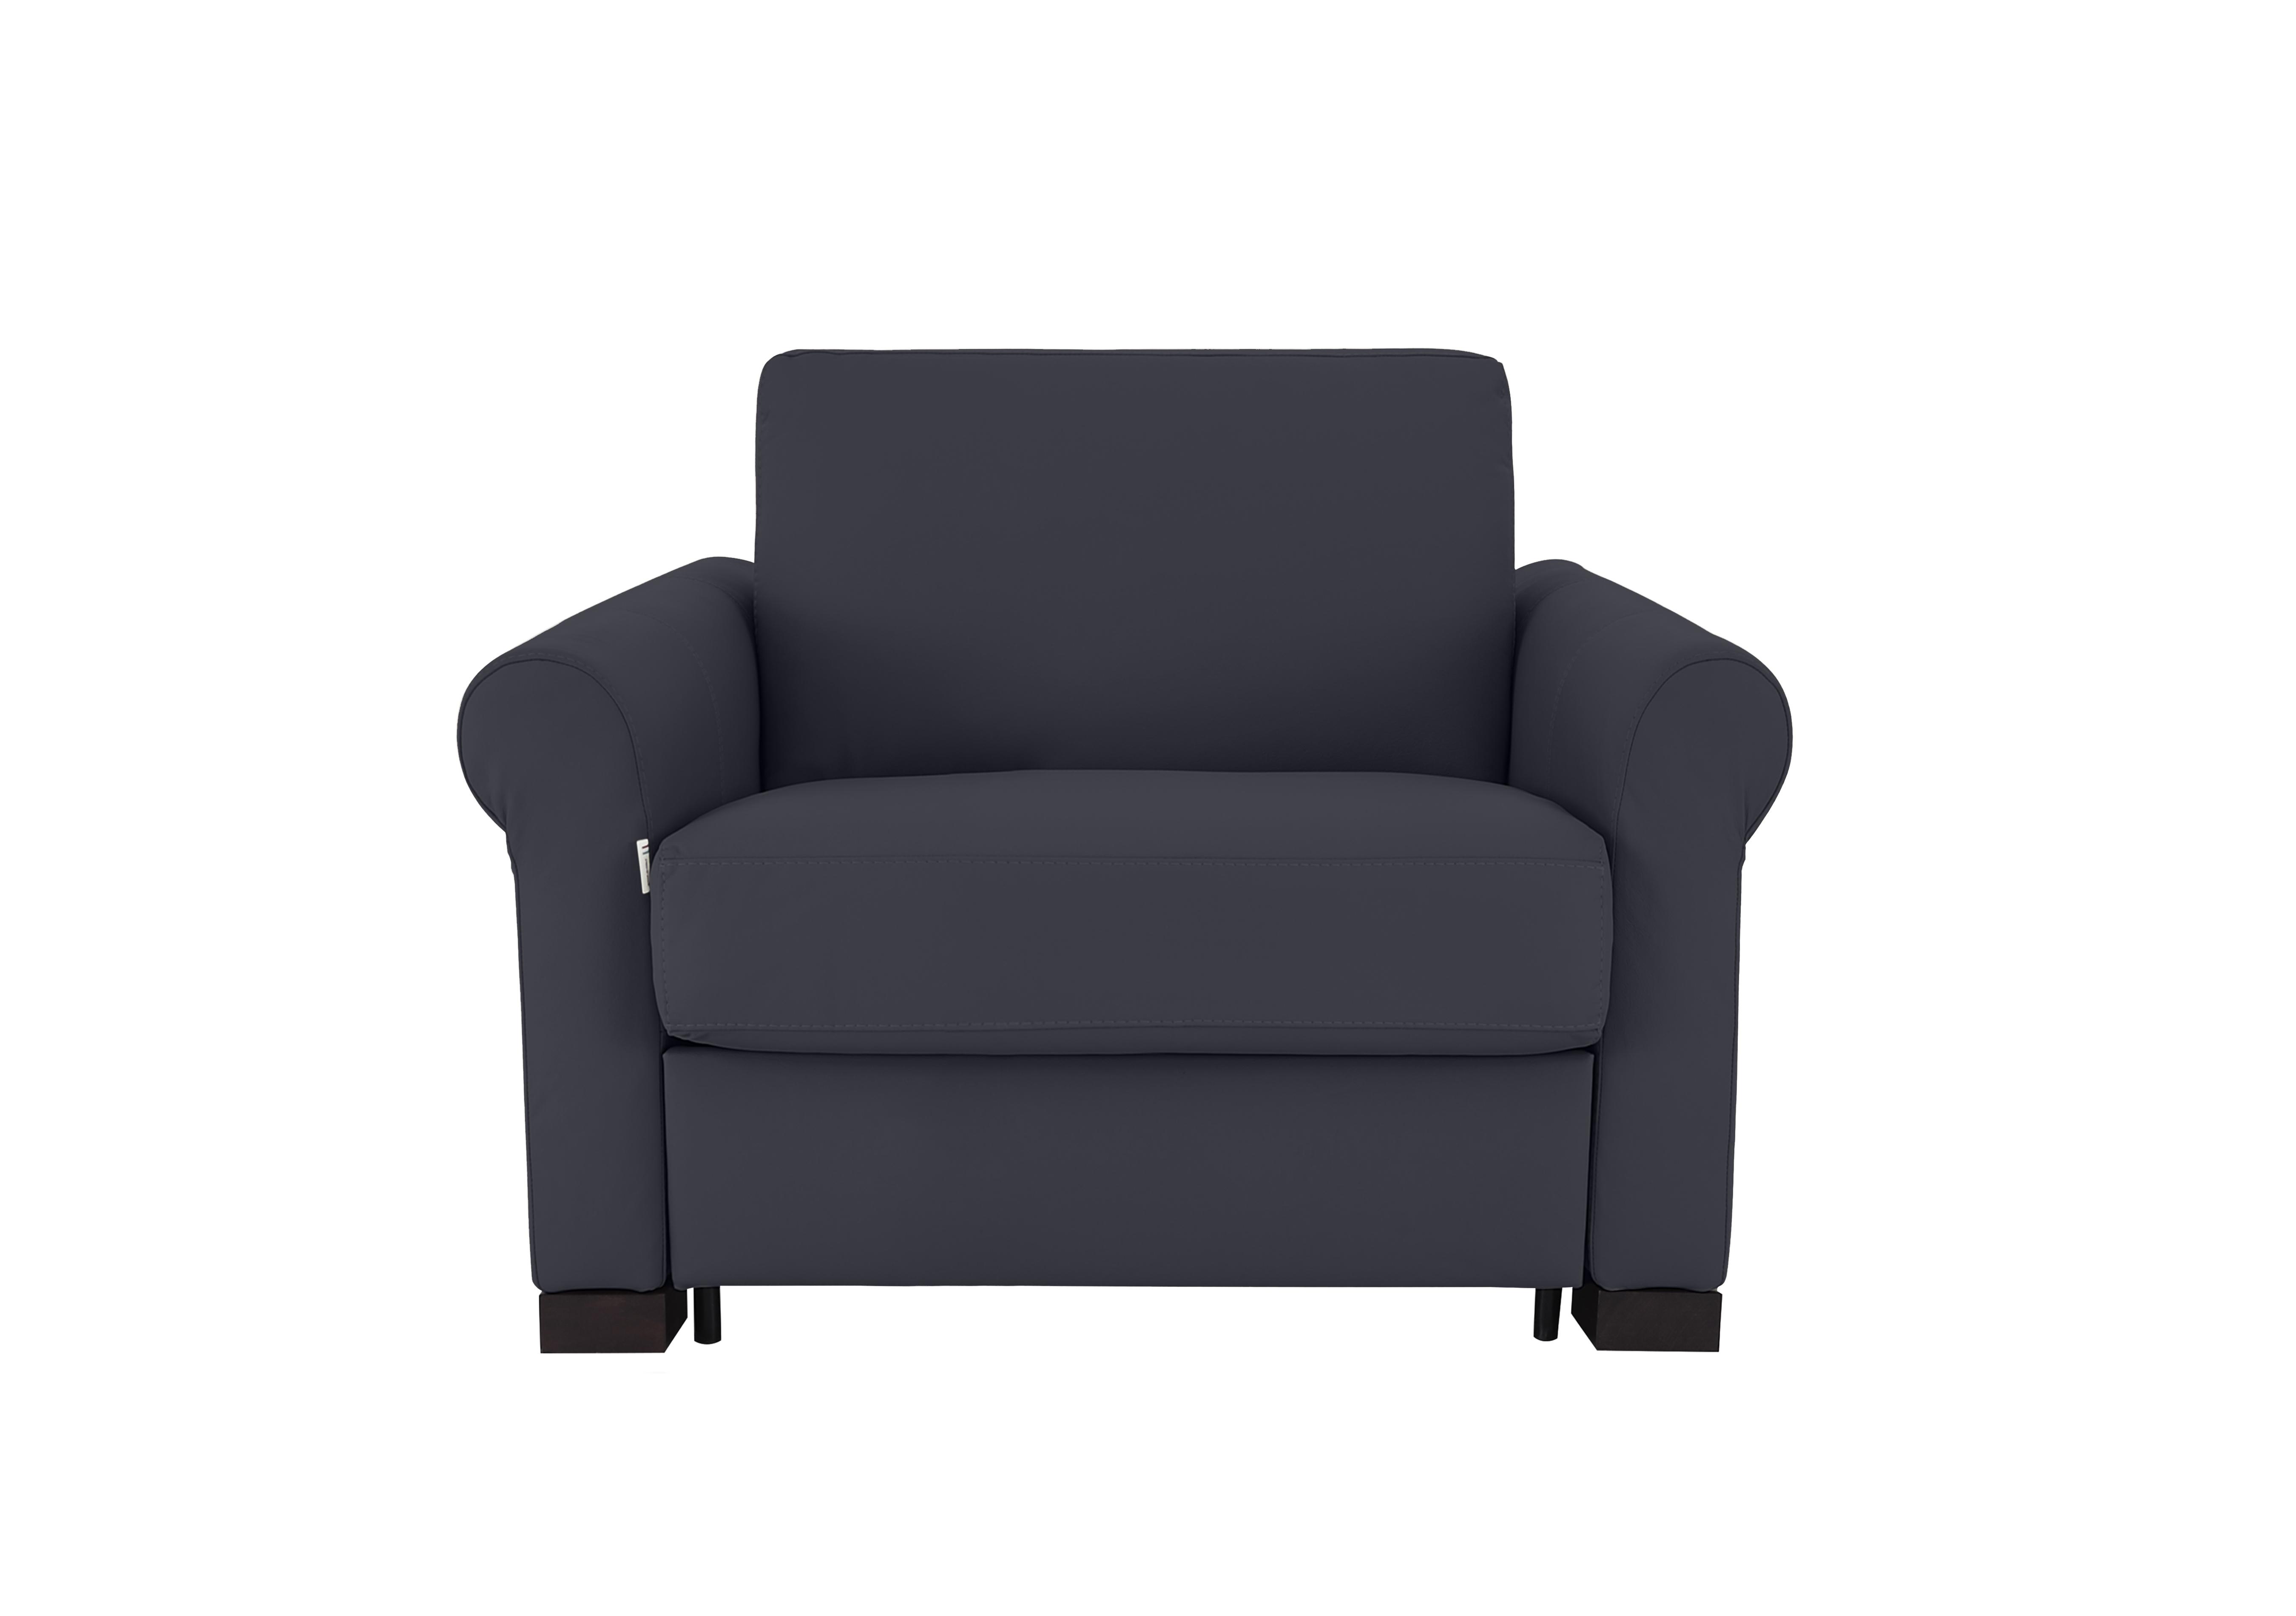 Alcova Leather Chair Sofa Bed with Scroll Arms in Torello Blu 81 on Furniture Village